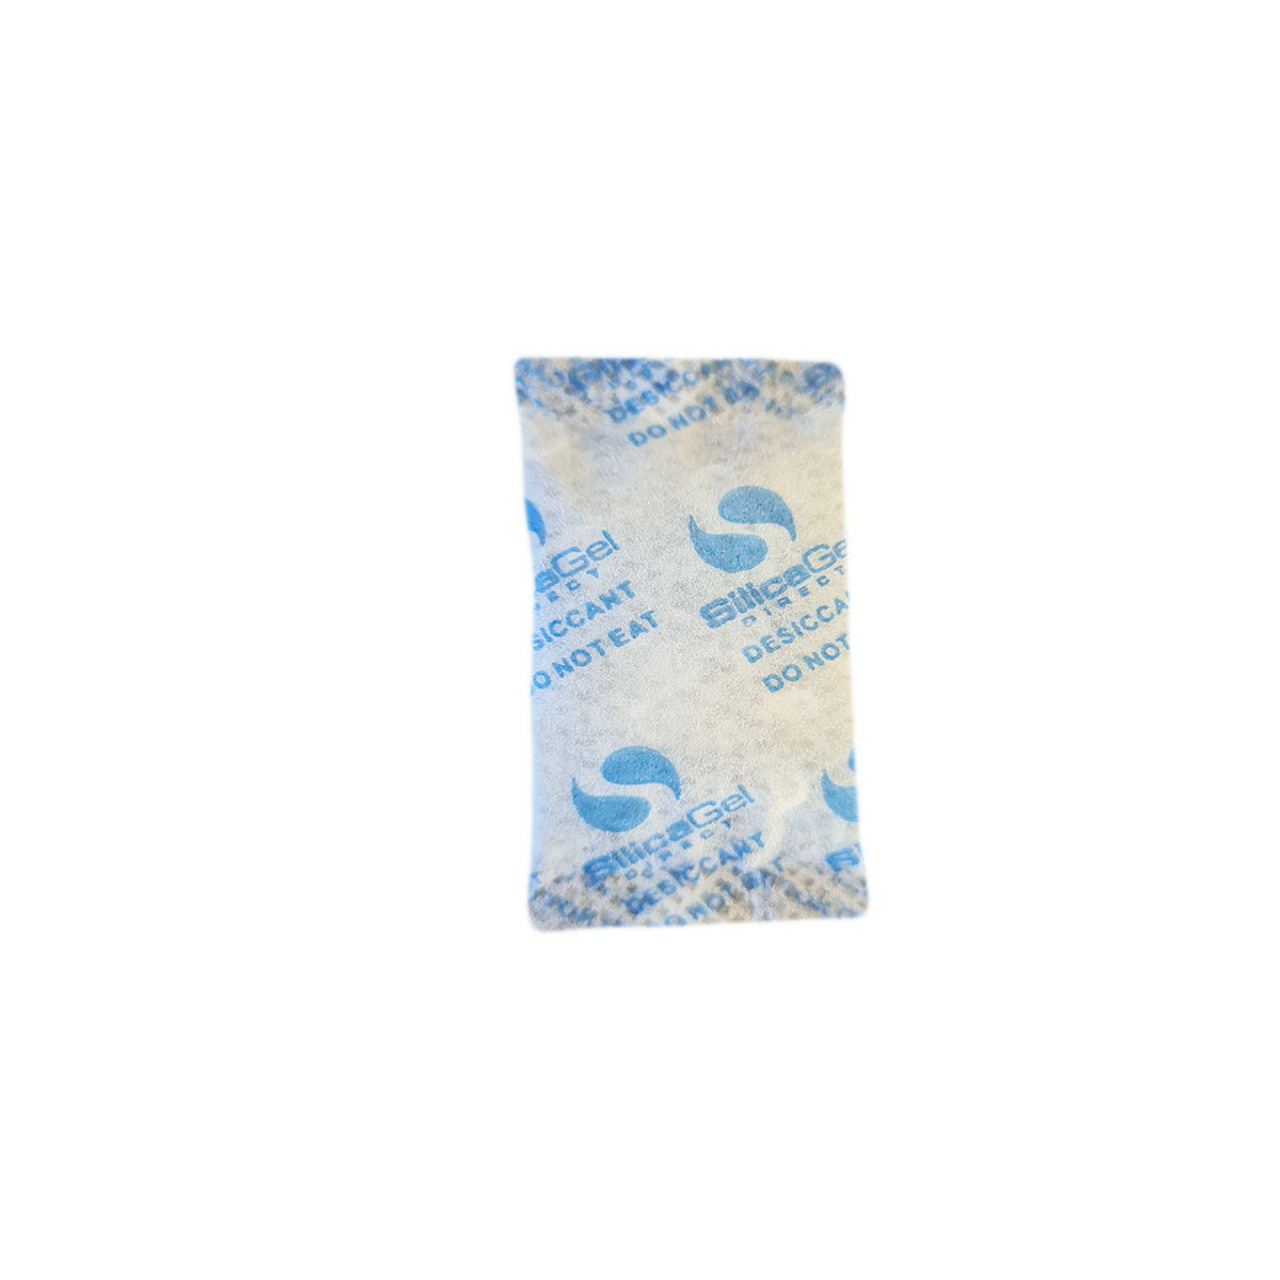 1gm Silica Gel Moisture Absorber Aiwa Paper Desiccant Packets 